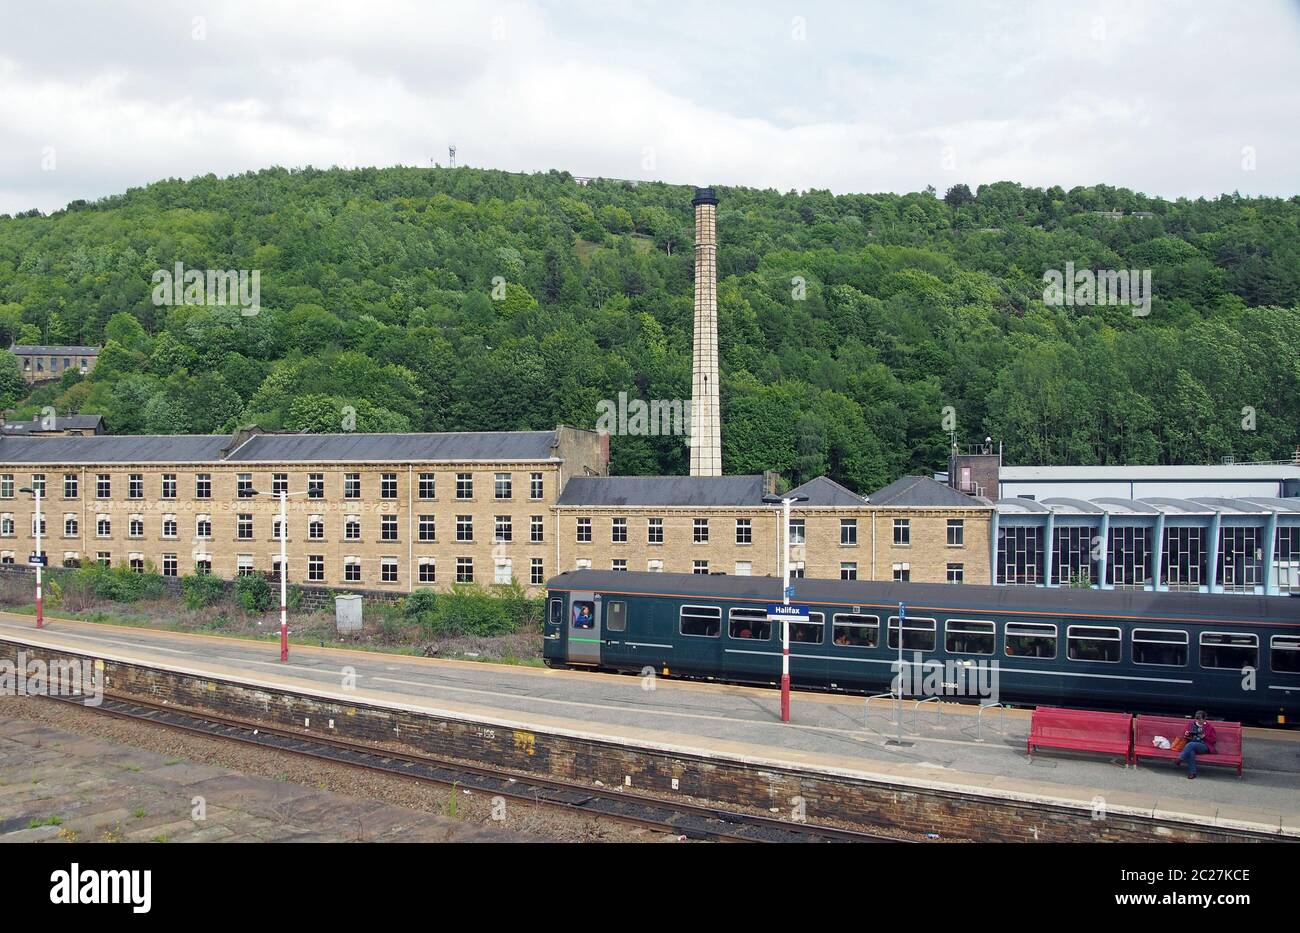 a pacer train pulling into halifax railway station in west yorkshire with surrounding buildings and tree covered hills Stock Photo